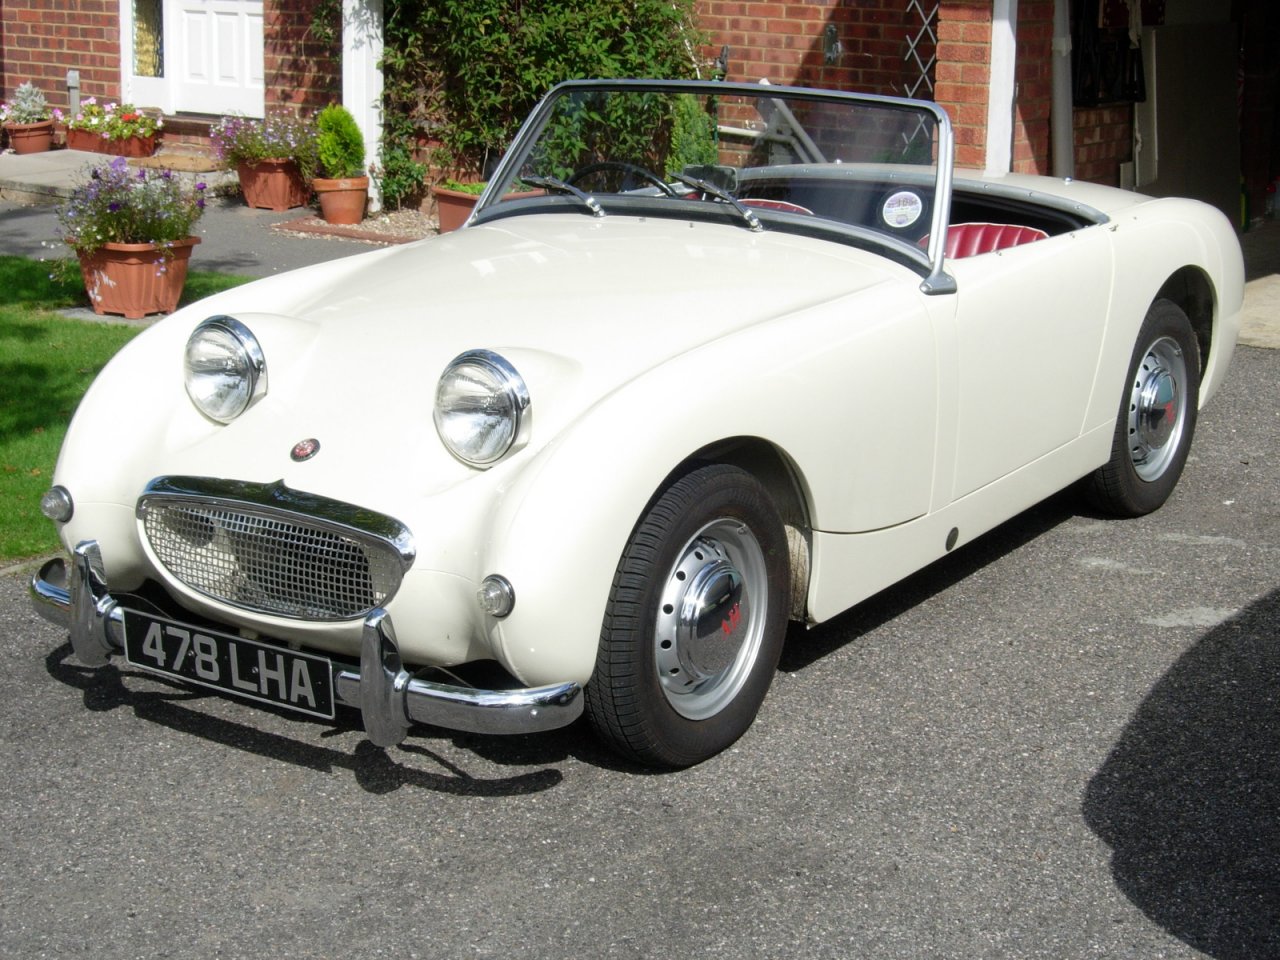 Image of Austin-Healey Sprite Special Supercharged